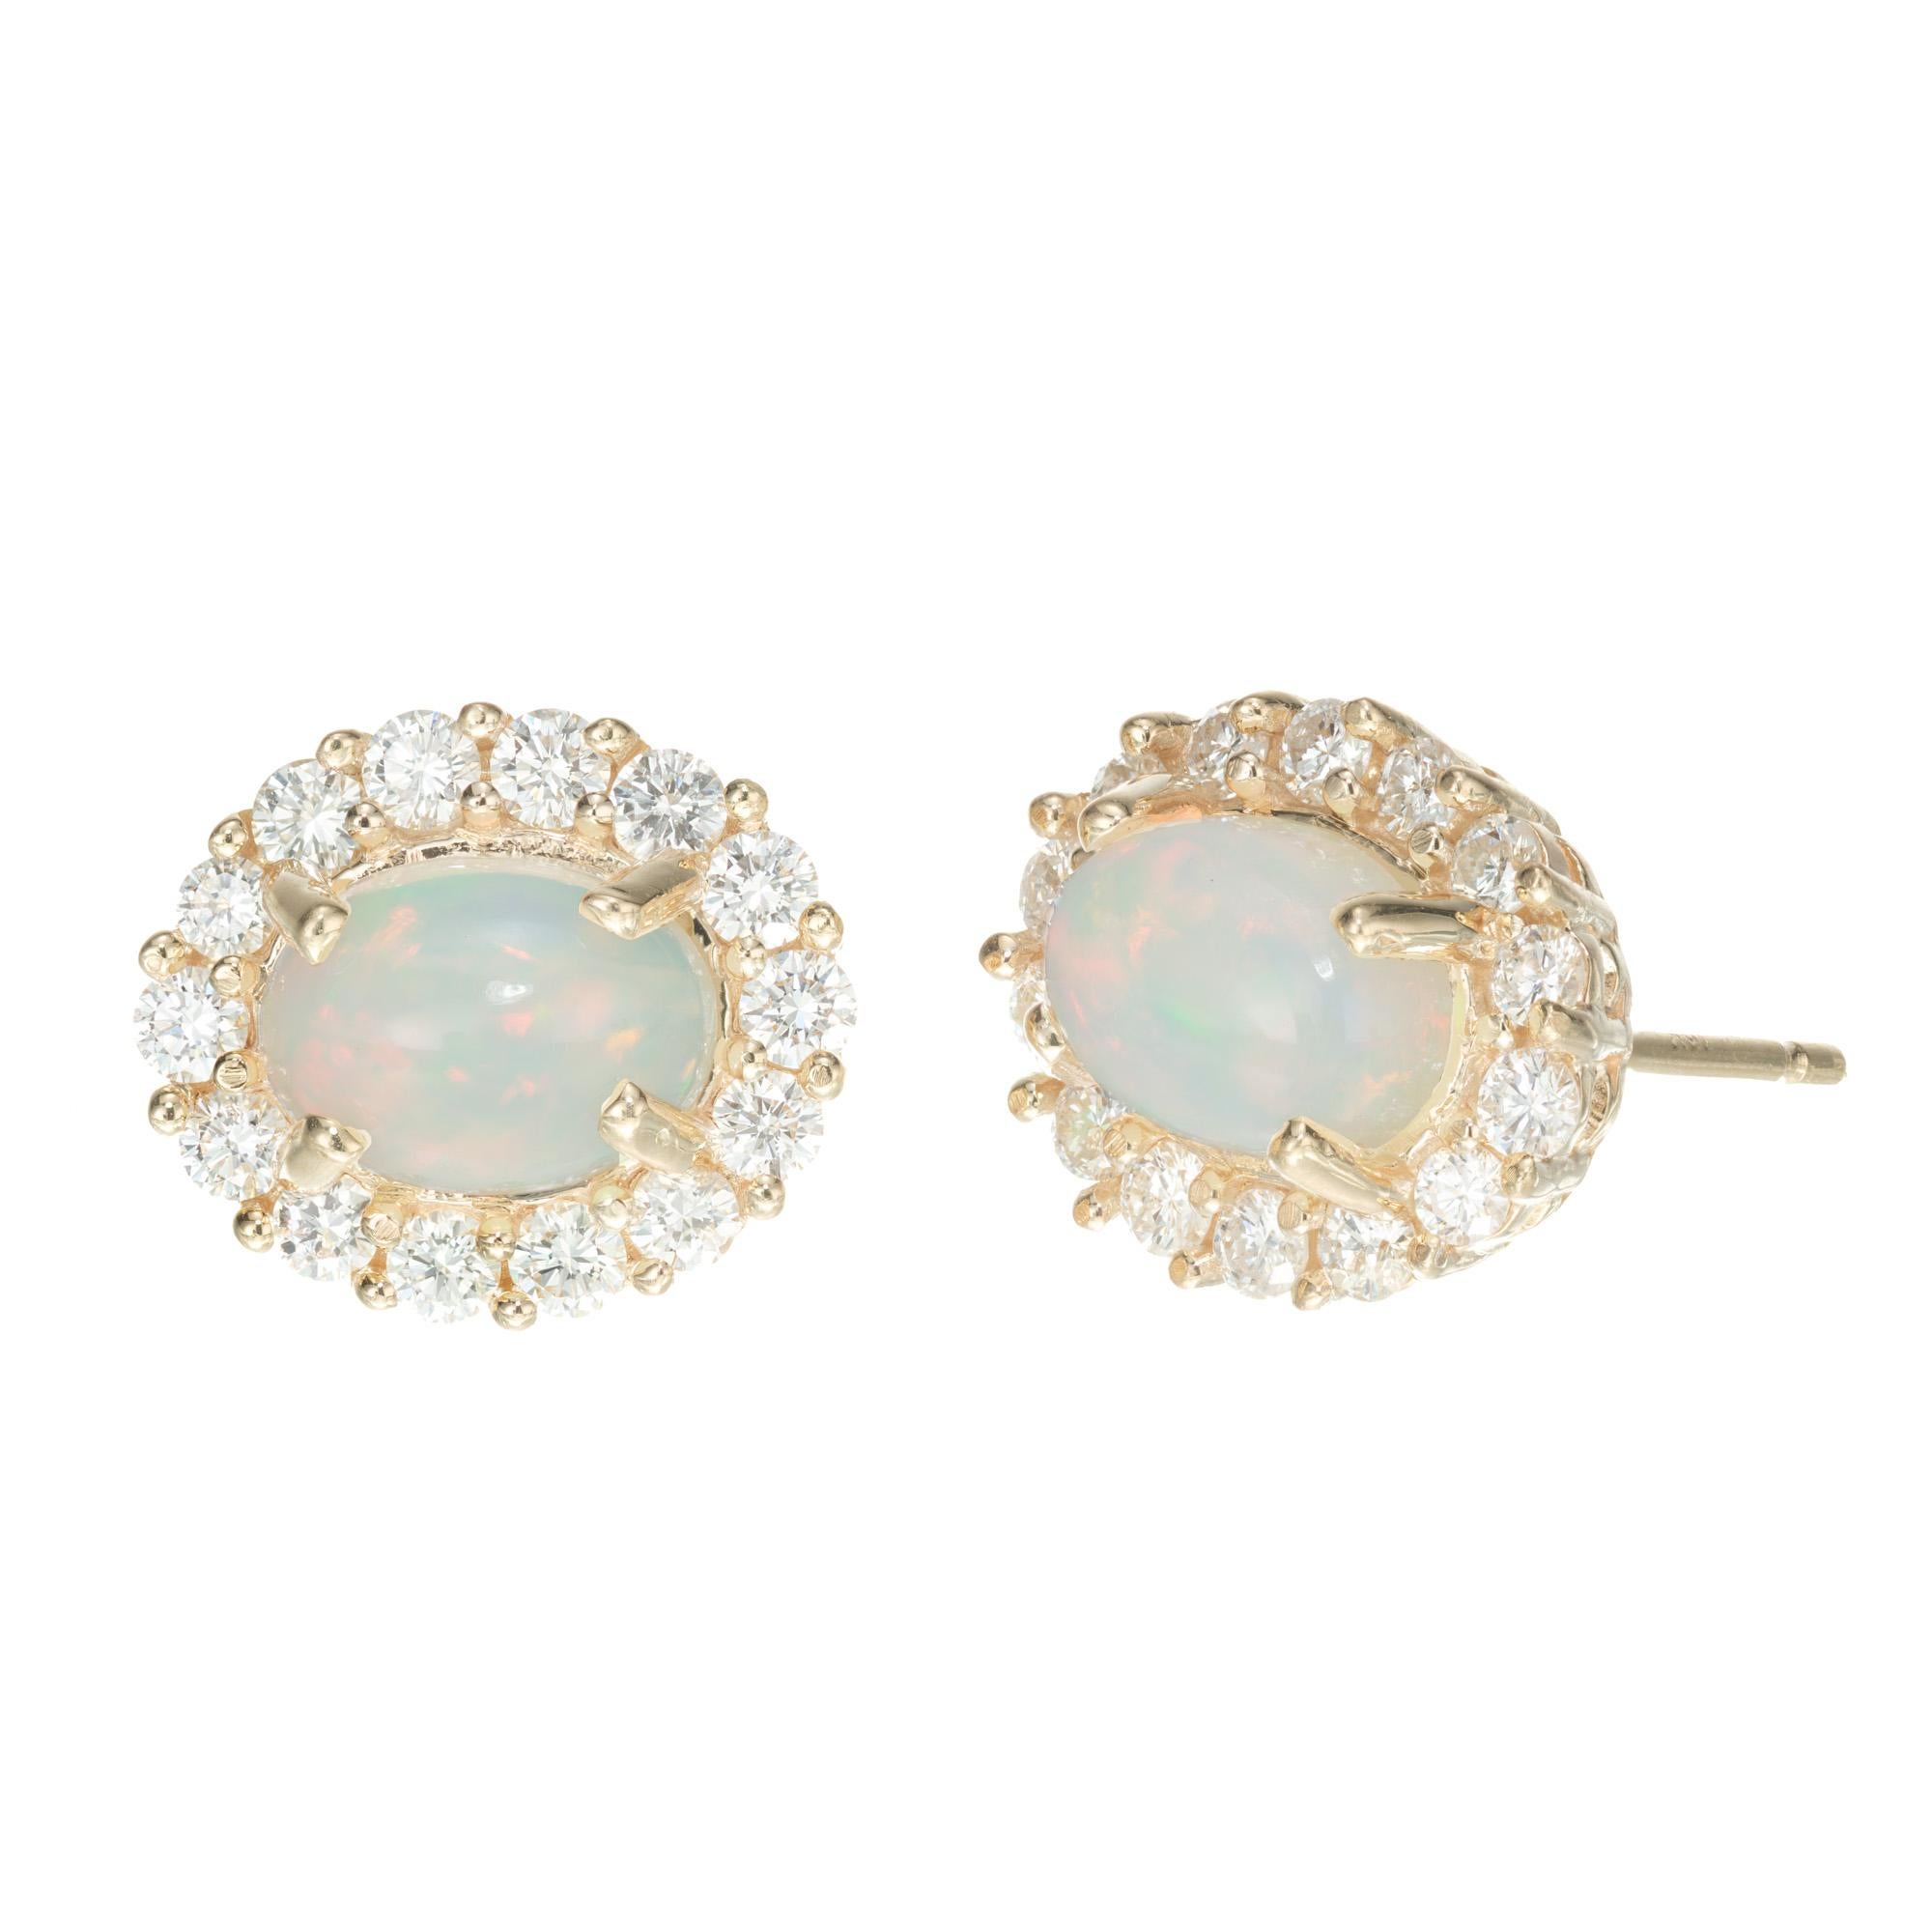 Translucent oval red green blue opal and diamond earrings. 2 oval cabochon opals totaling 1.91cts, set in 14k yellow gold settings each with a halo of round brilliant cut diamonds. Designed and crafted in the Peter Suchy Workshop.

2 oval cabochon